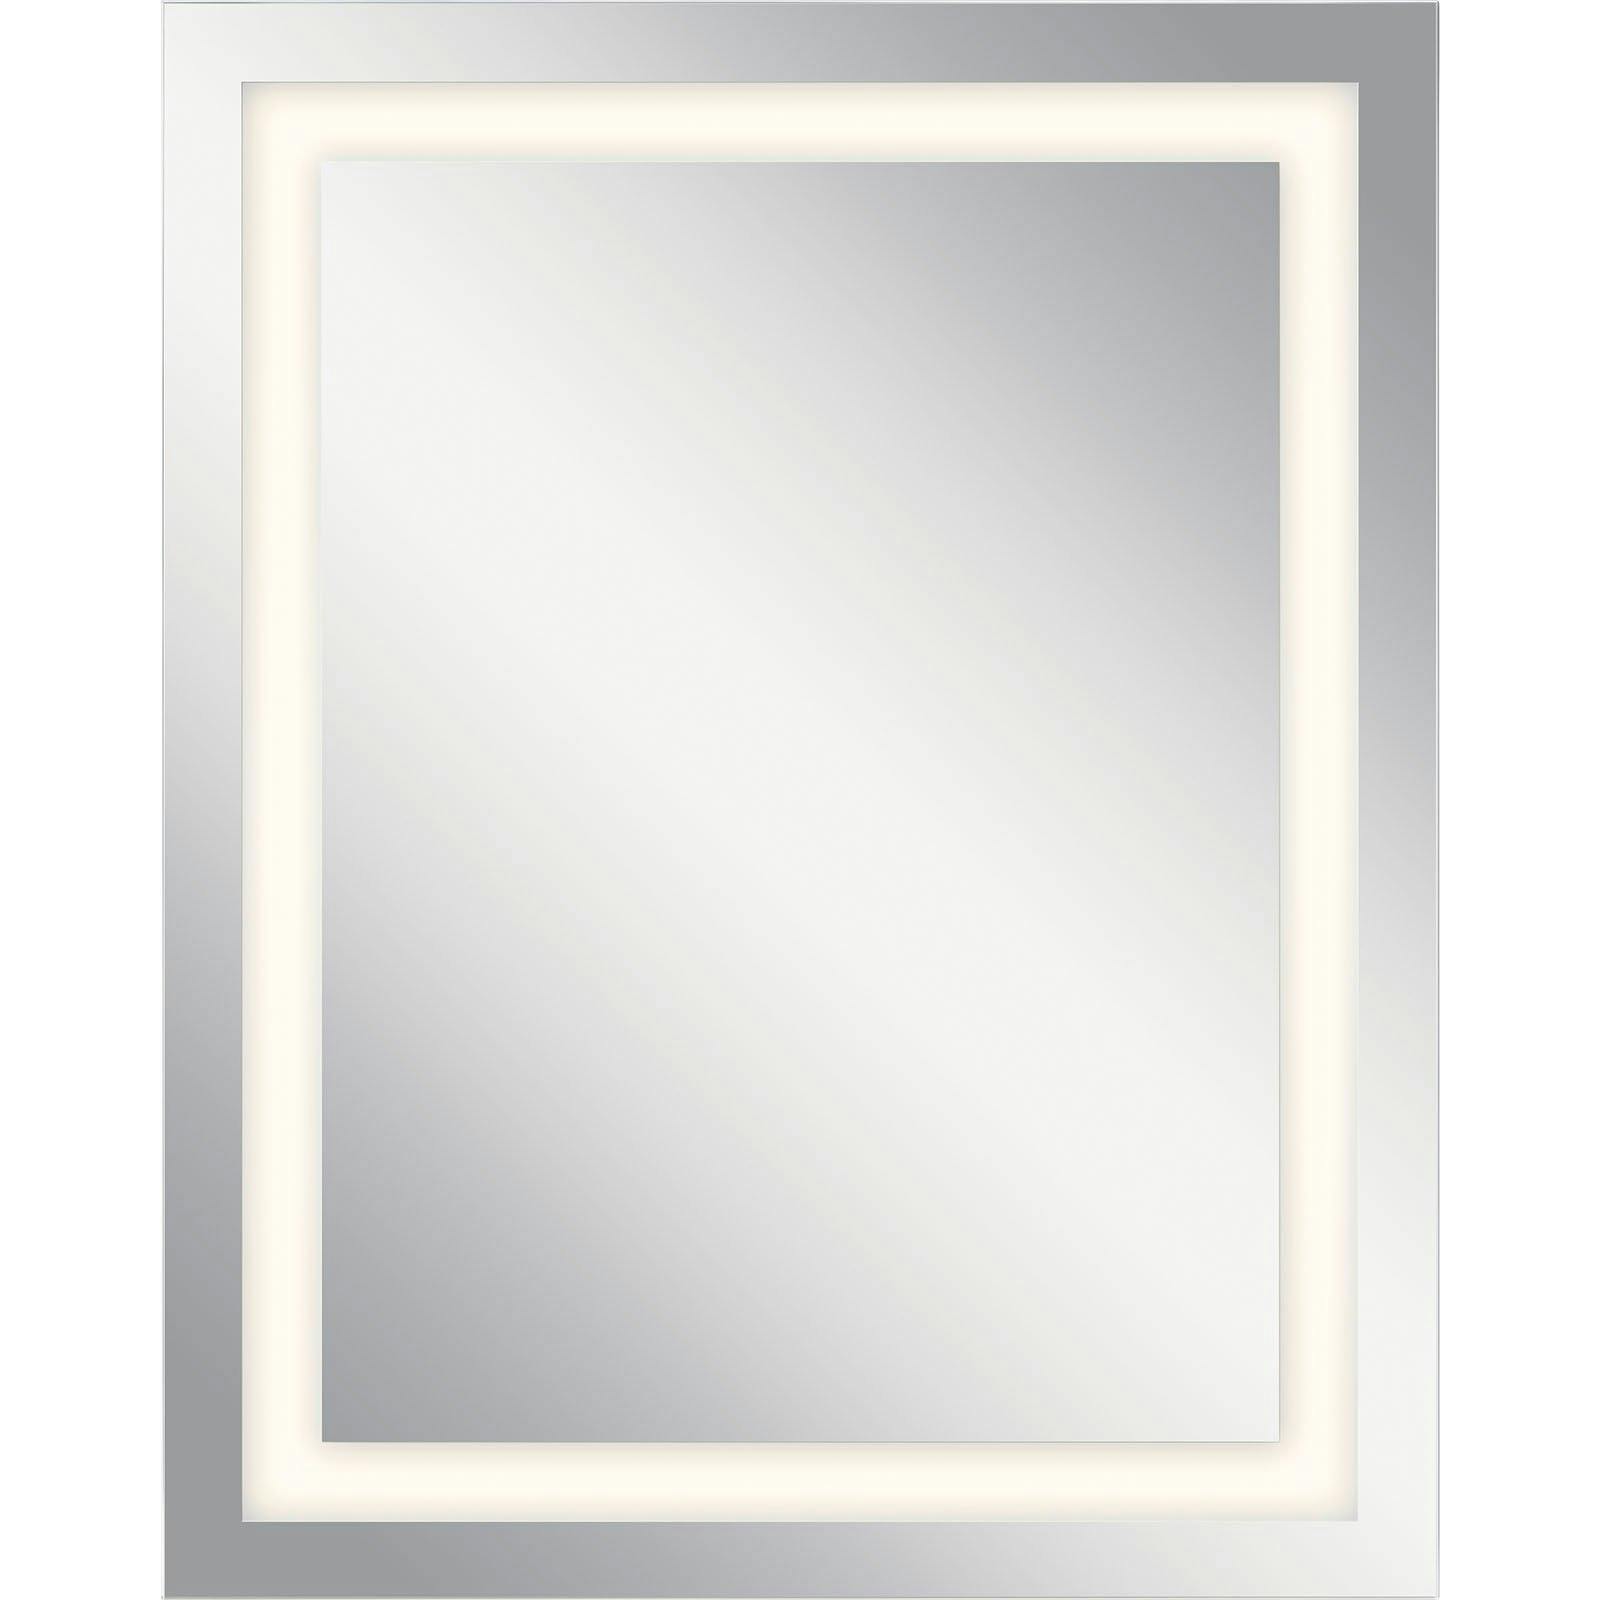 24" x 30" Rectangular LED Backlit Mirror hung vertically on a white background